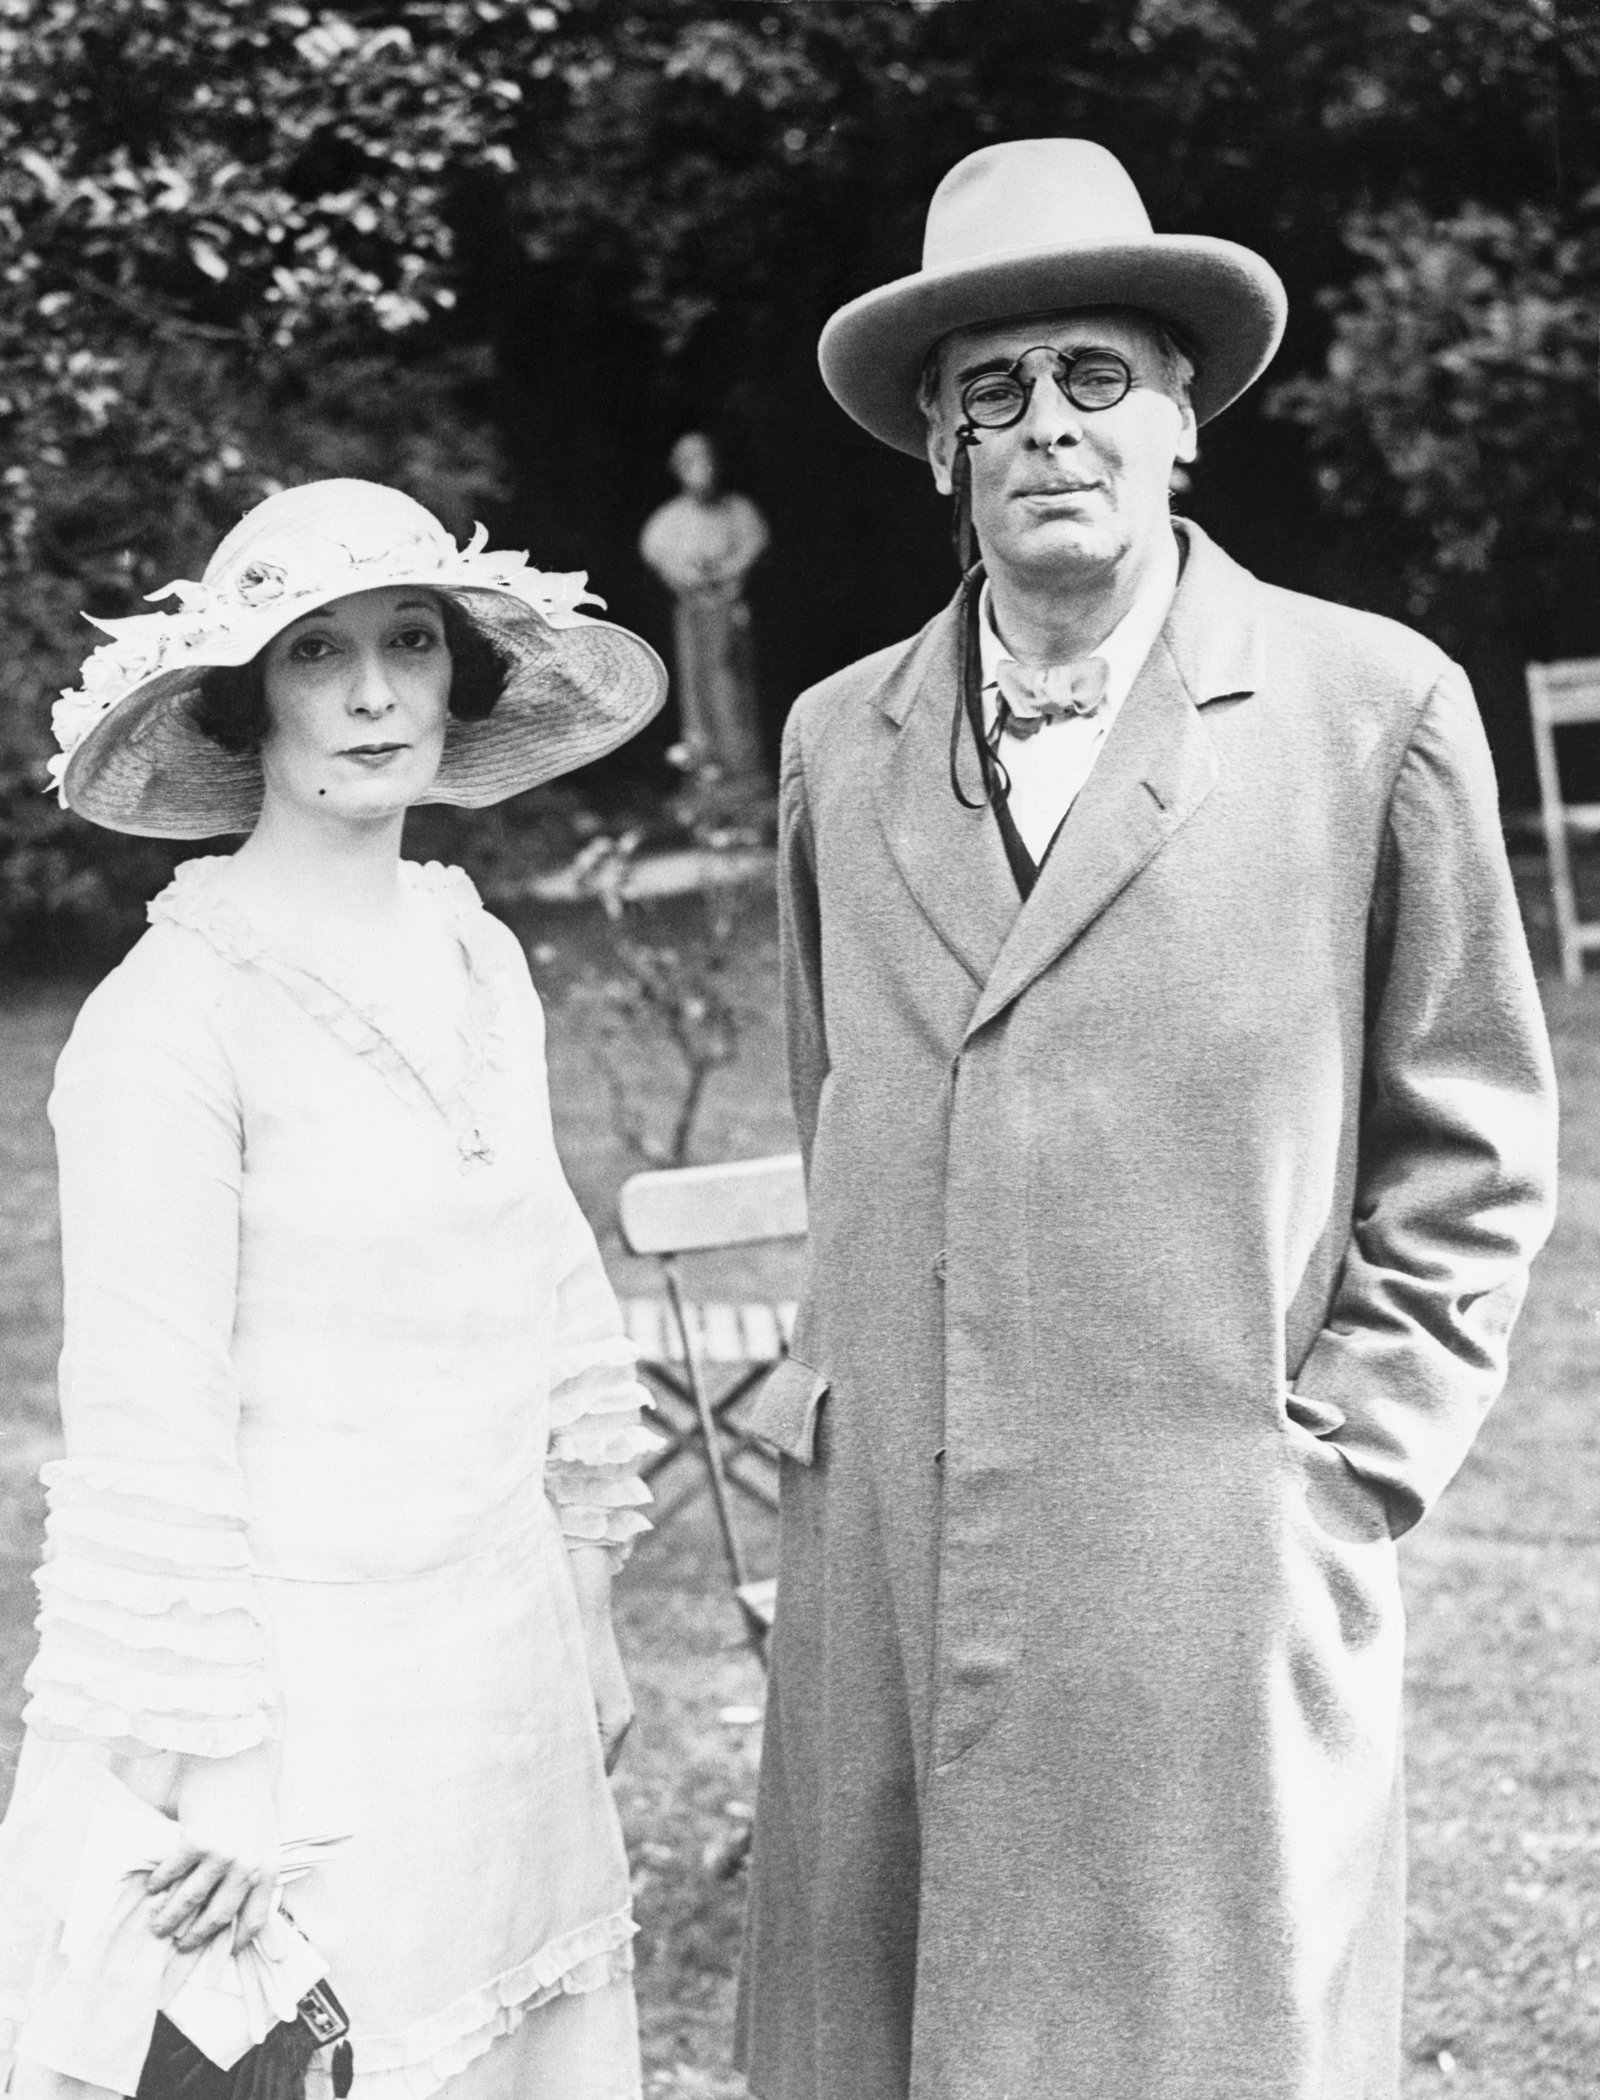 Image - W.B. Yeats, seen here with Lady Lavery, was one of the first senators. Photo: Getty Images